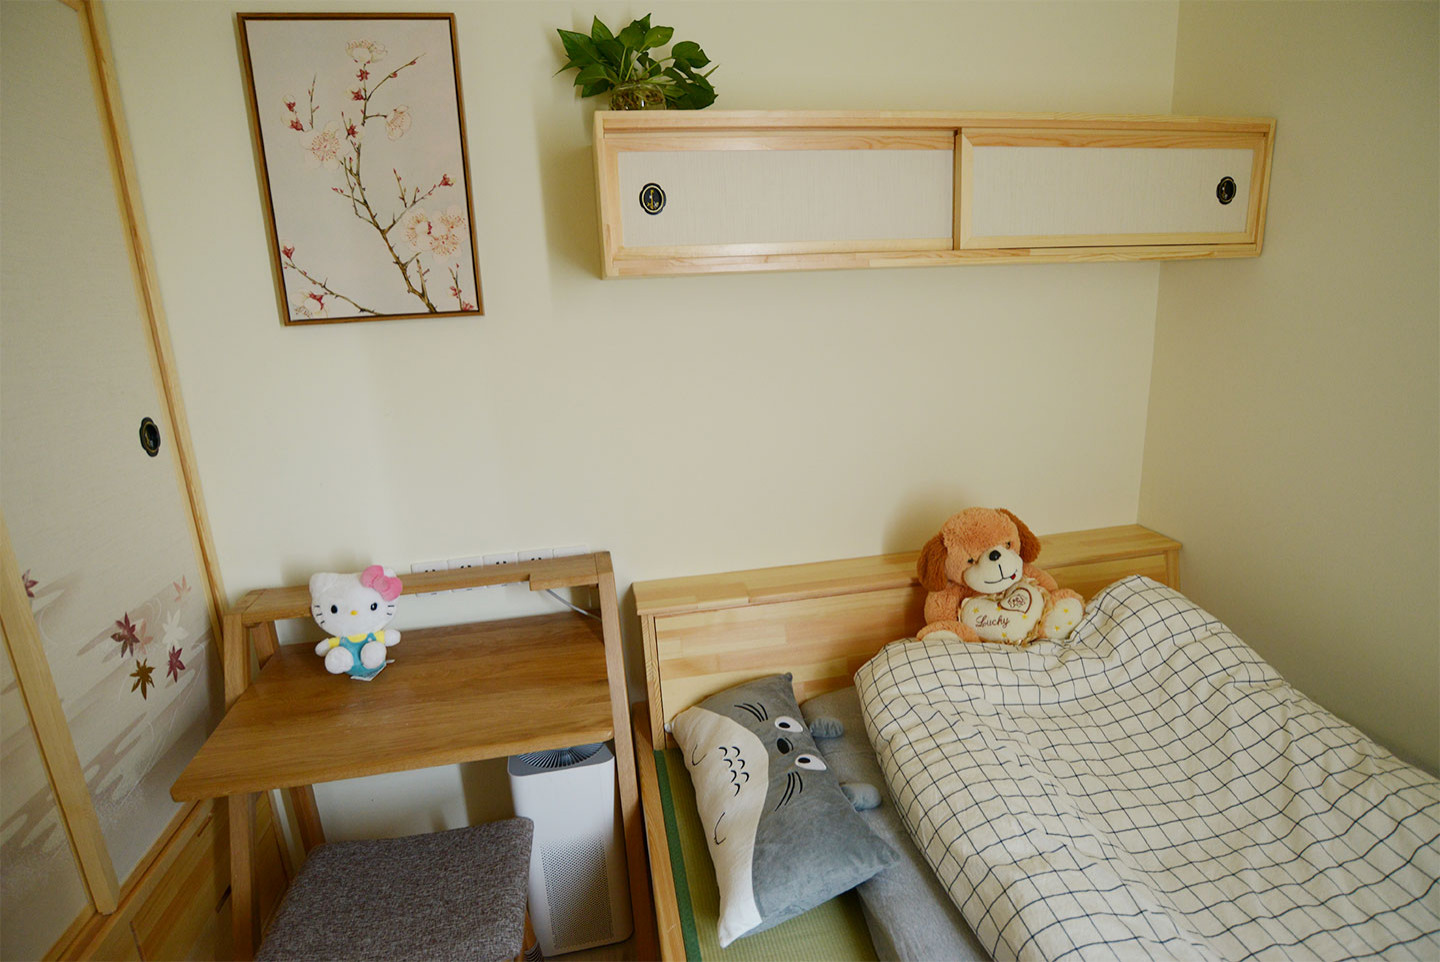 67sqm 2 Bedroom Apartment With Japanese Style Pandamart Img~033115a80912c6b2 16 2702 1 B708345 